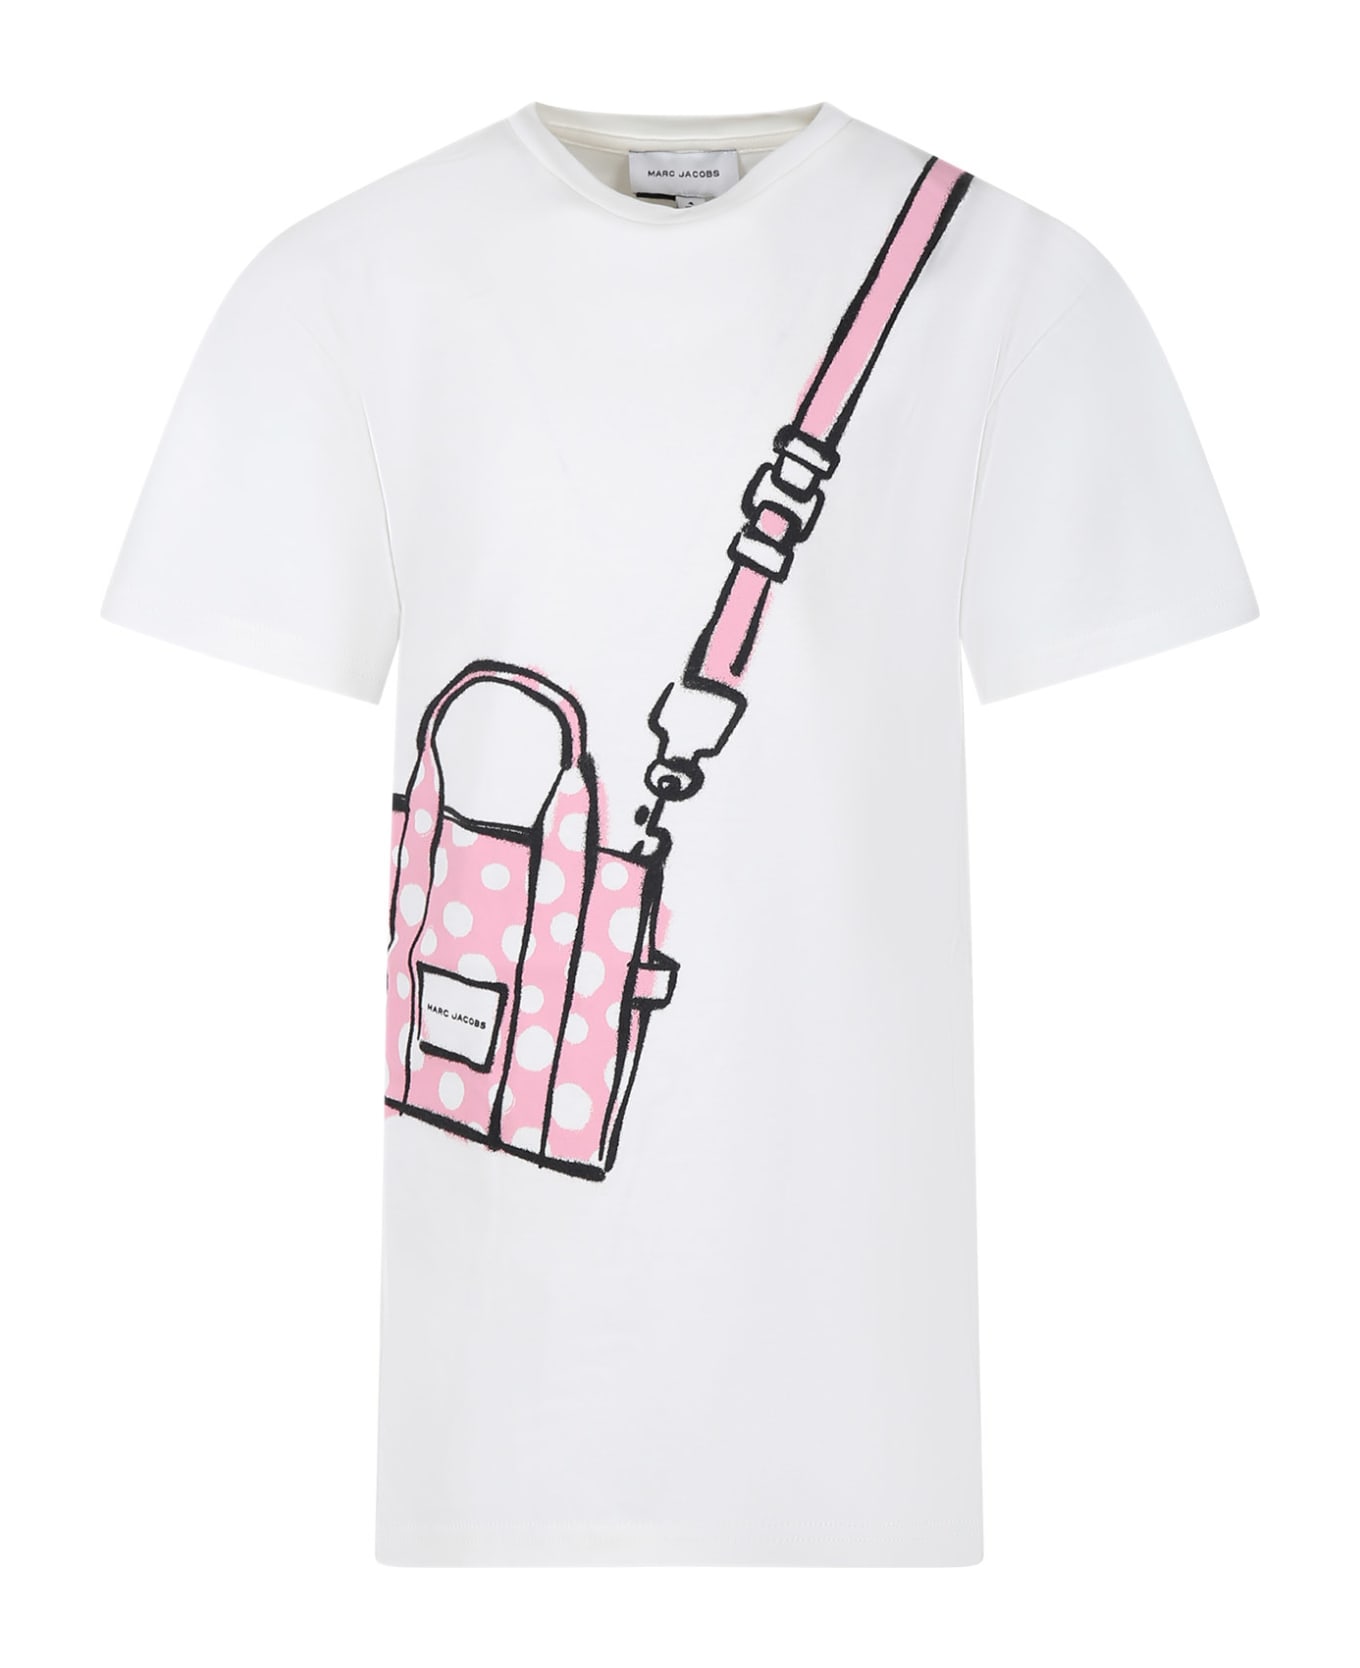 Marc Jacobs White Dress For Girl With Iconic Bag - White